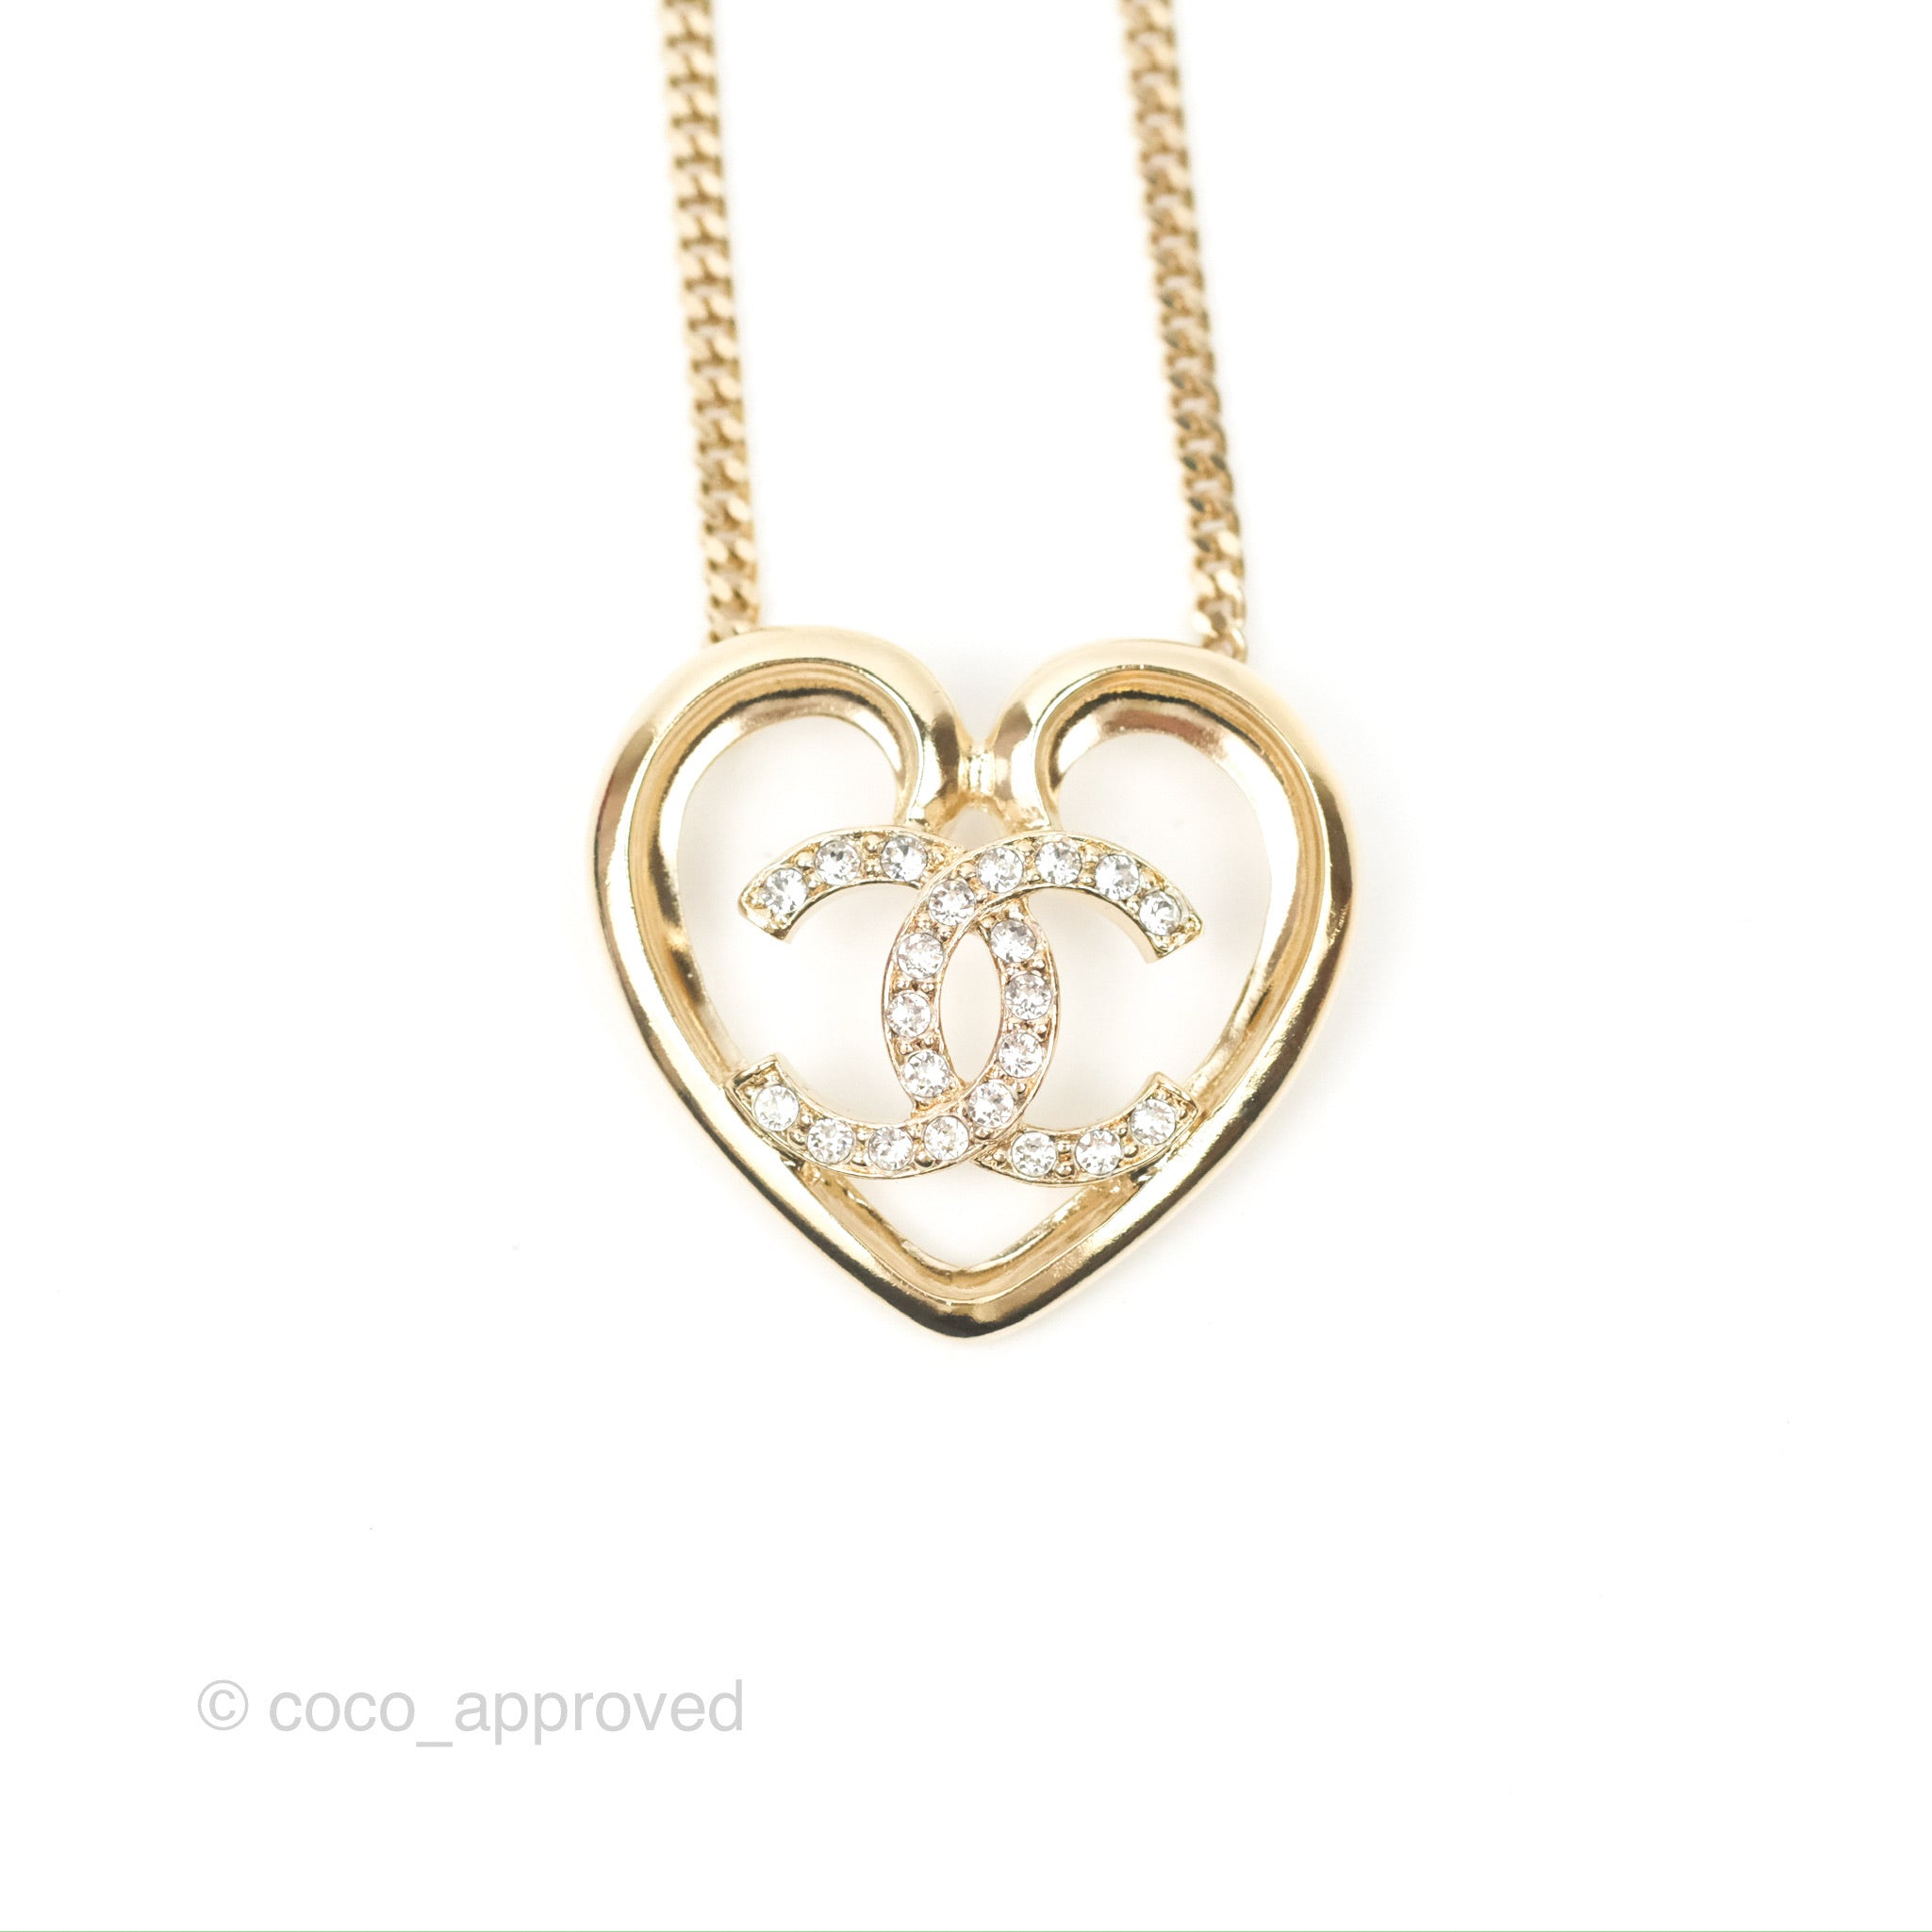 Brand New Chanel 23C Heart crystal necklace (not chanel 23S